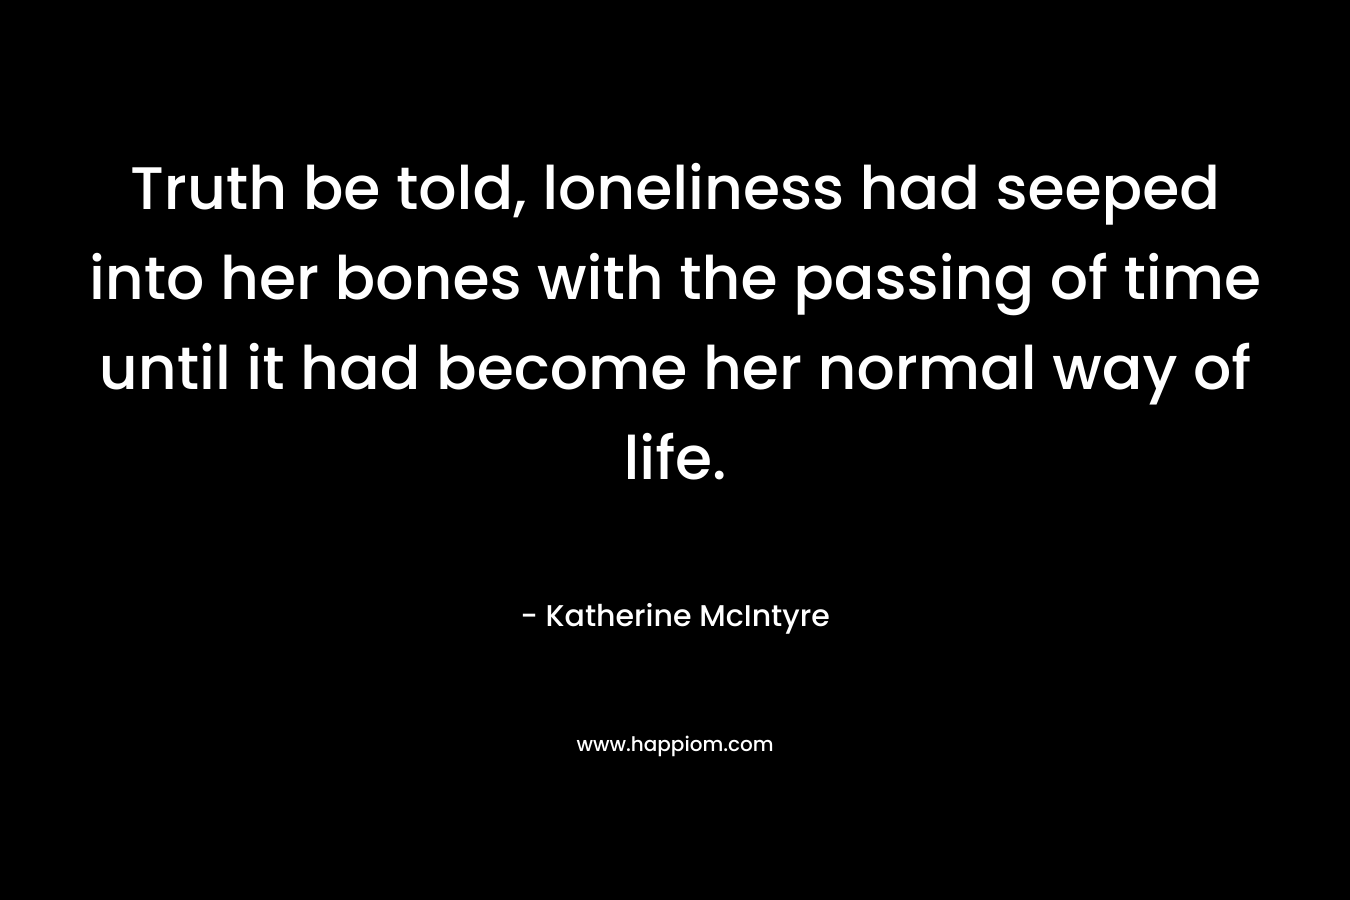 Truth be told, loneliness had seeped into her bones with the passing of time until it had become her normal way of life.